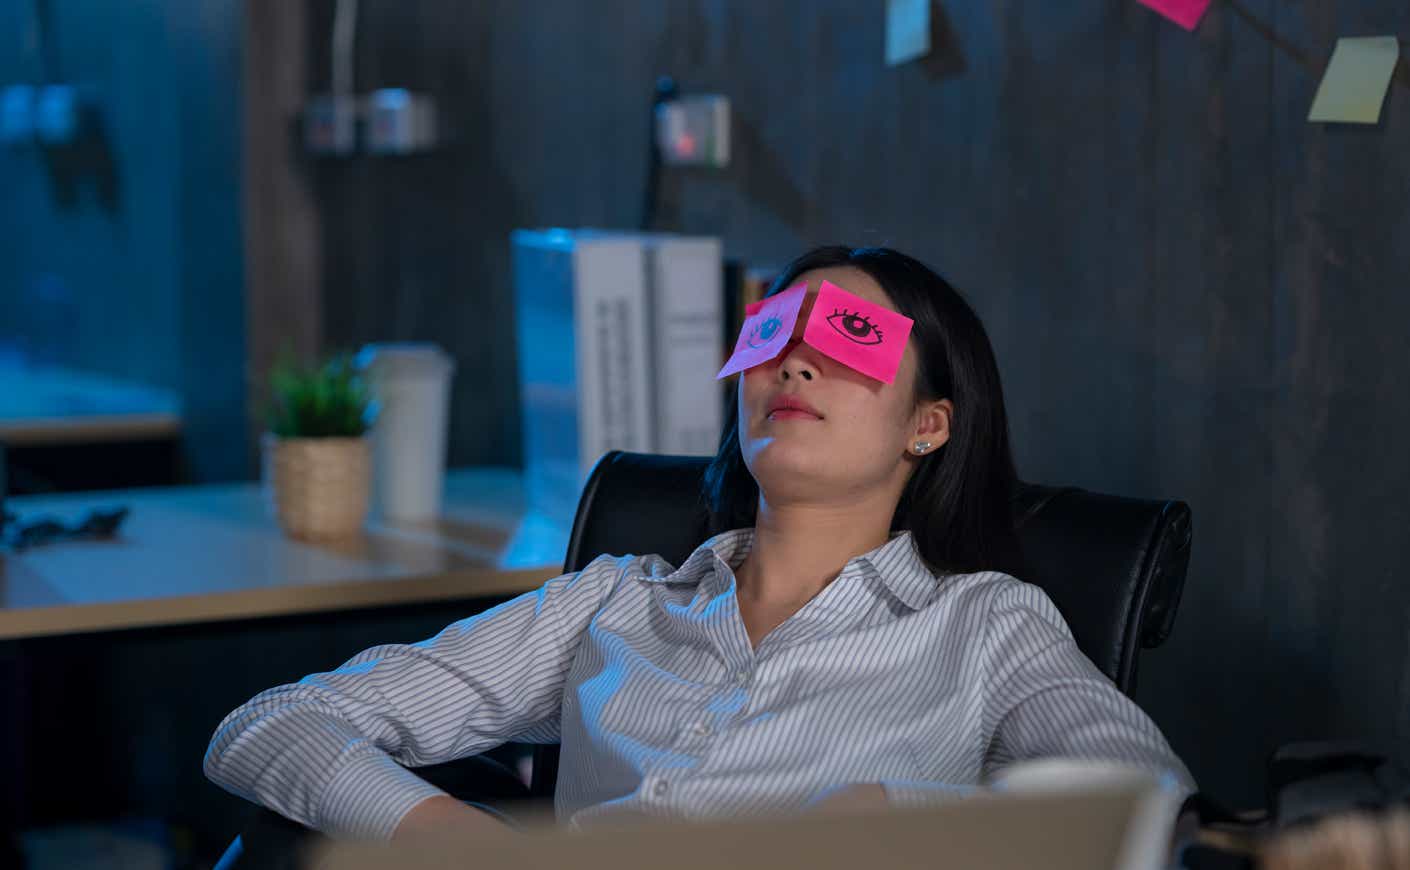 a woman with drawn on eyes sleeps at her desk